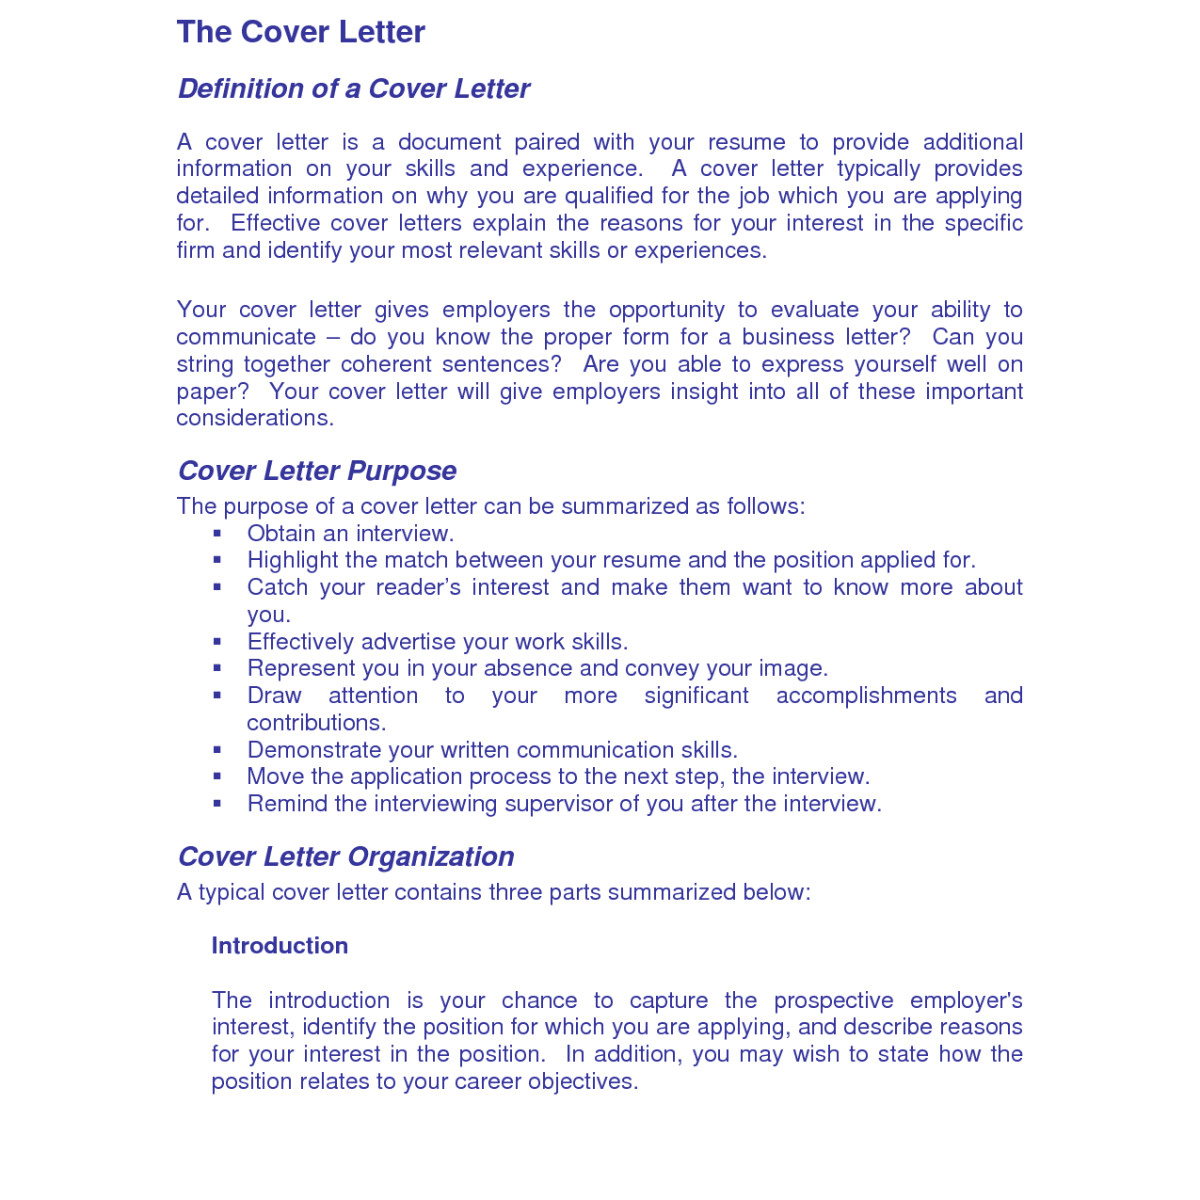 cover letter meaning in urdu